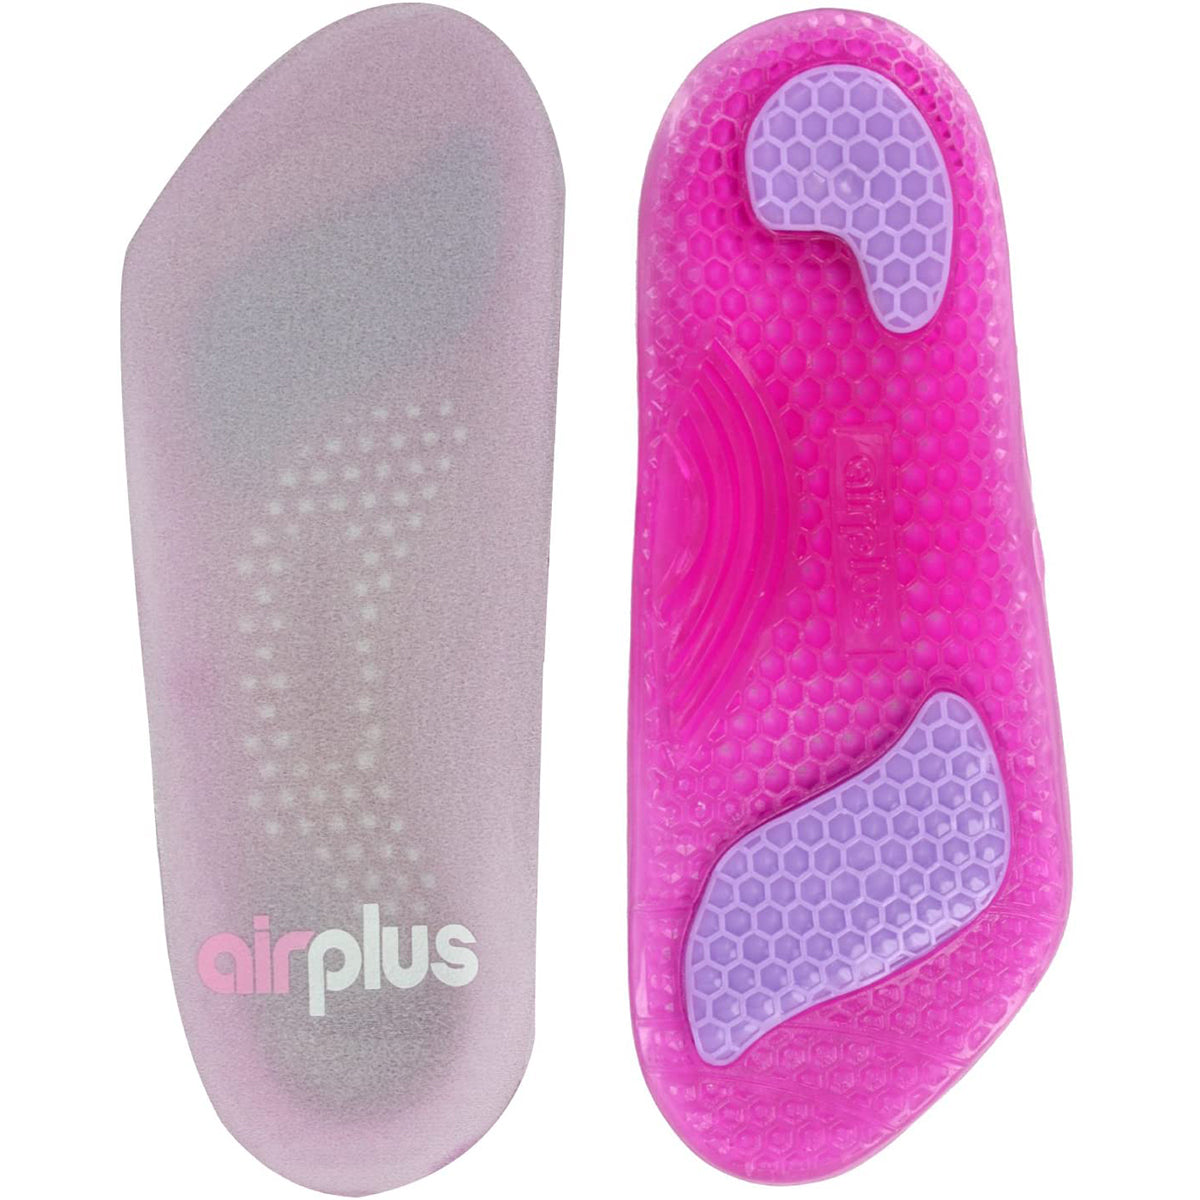 Airplus Women's Size 5-11 Gel Orthotic Stability 3/4 Length Shoe Insole Airplus